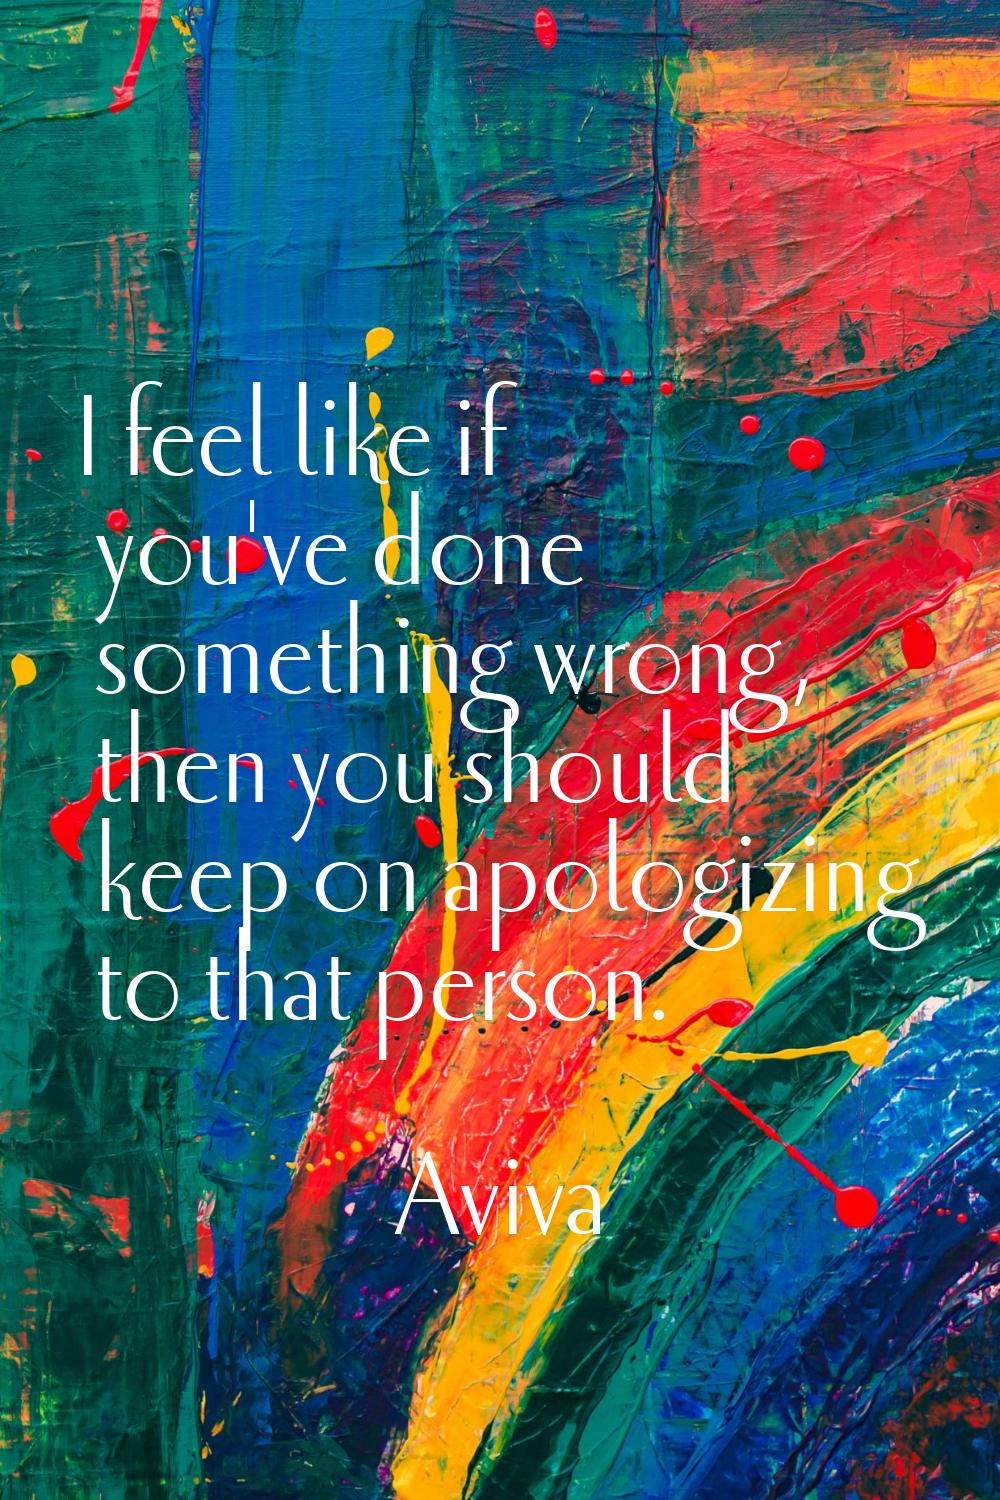 I feel like if you've done something wrong, then you should keep on apologizing to that person.